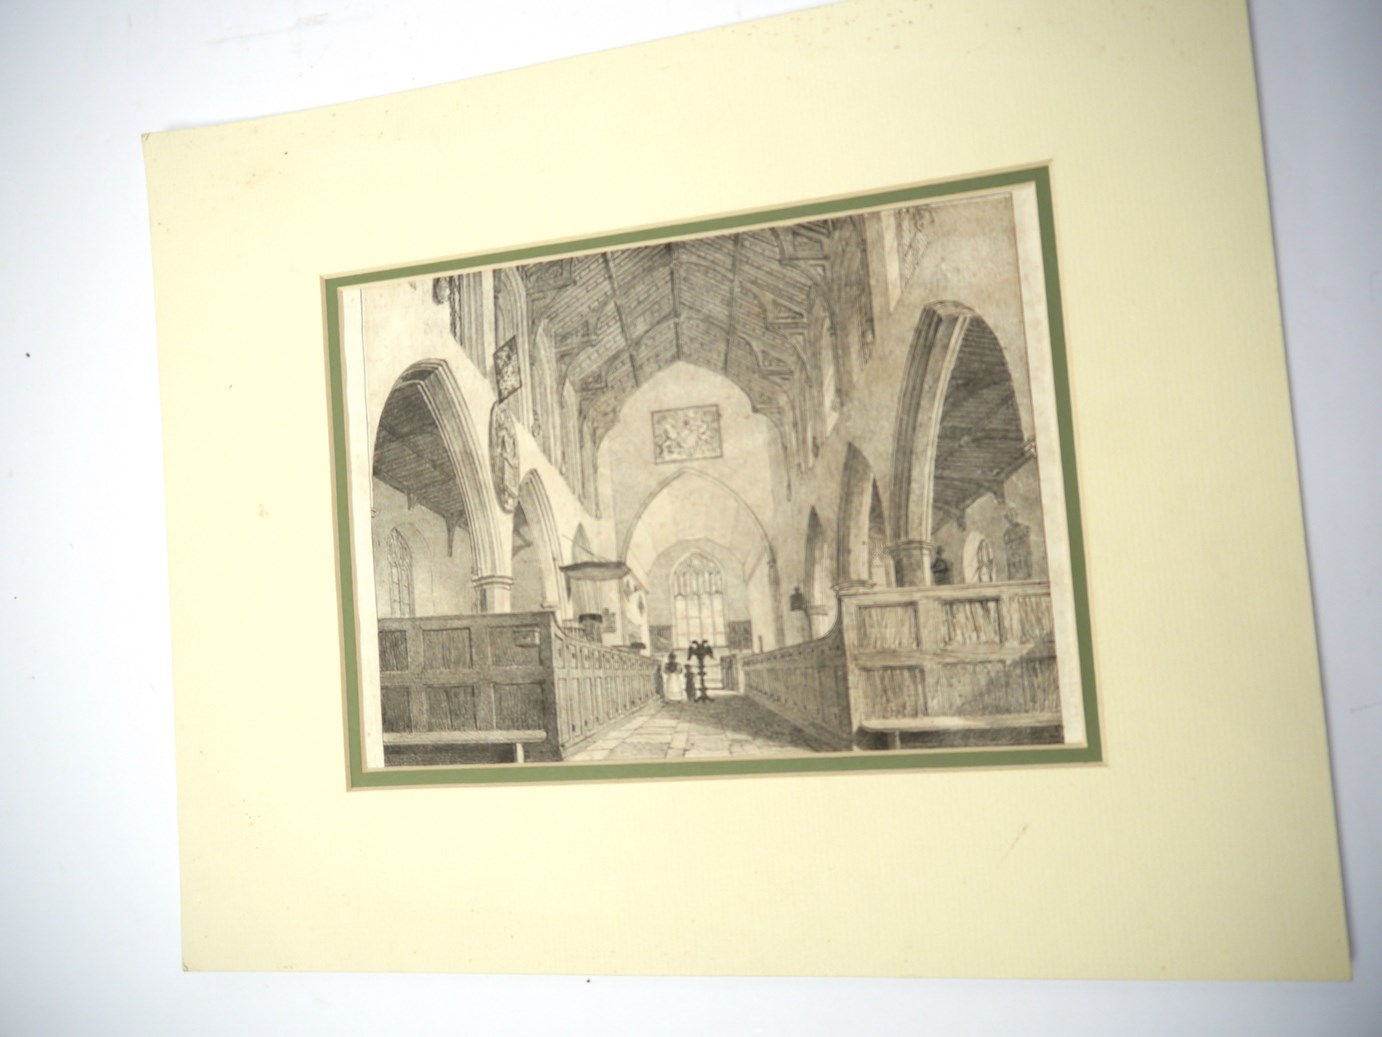 A scarce 19th Century interior lithographic view of Redenhall Church, probably by Ladbrooke/or W.